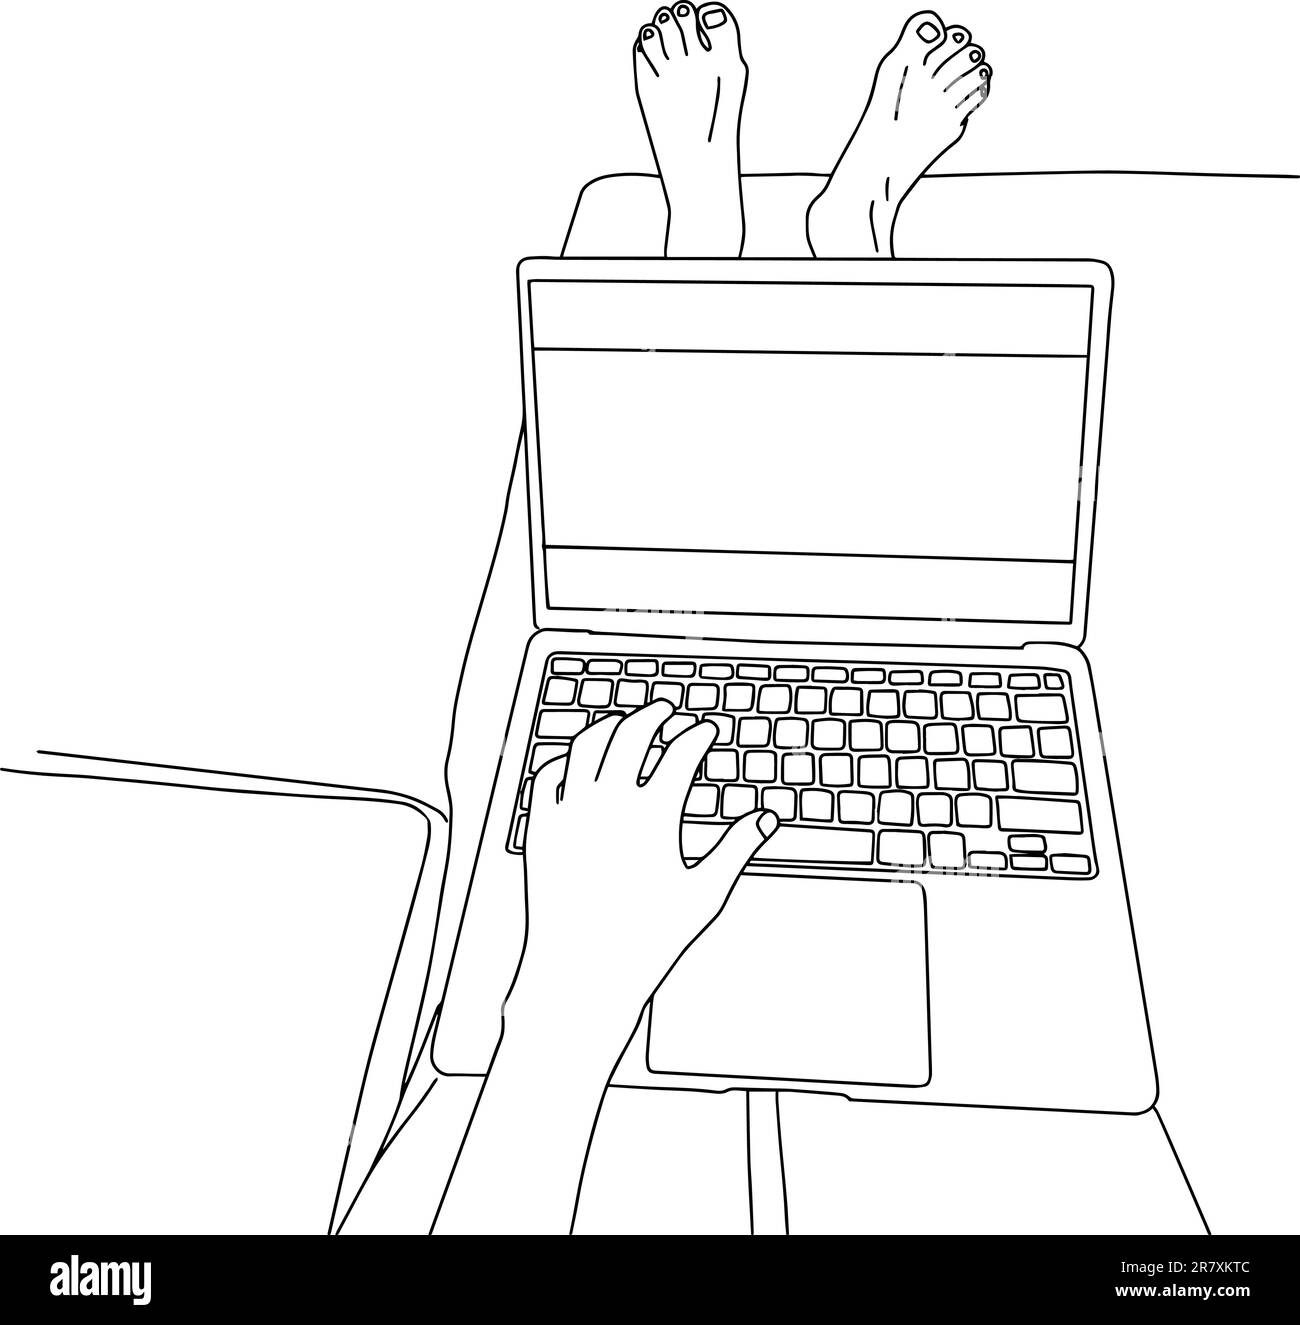 Outline sketch of laptop on lap with hand on keyboard and feet laying on coach Stock Vector